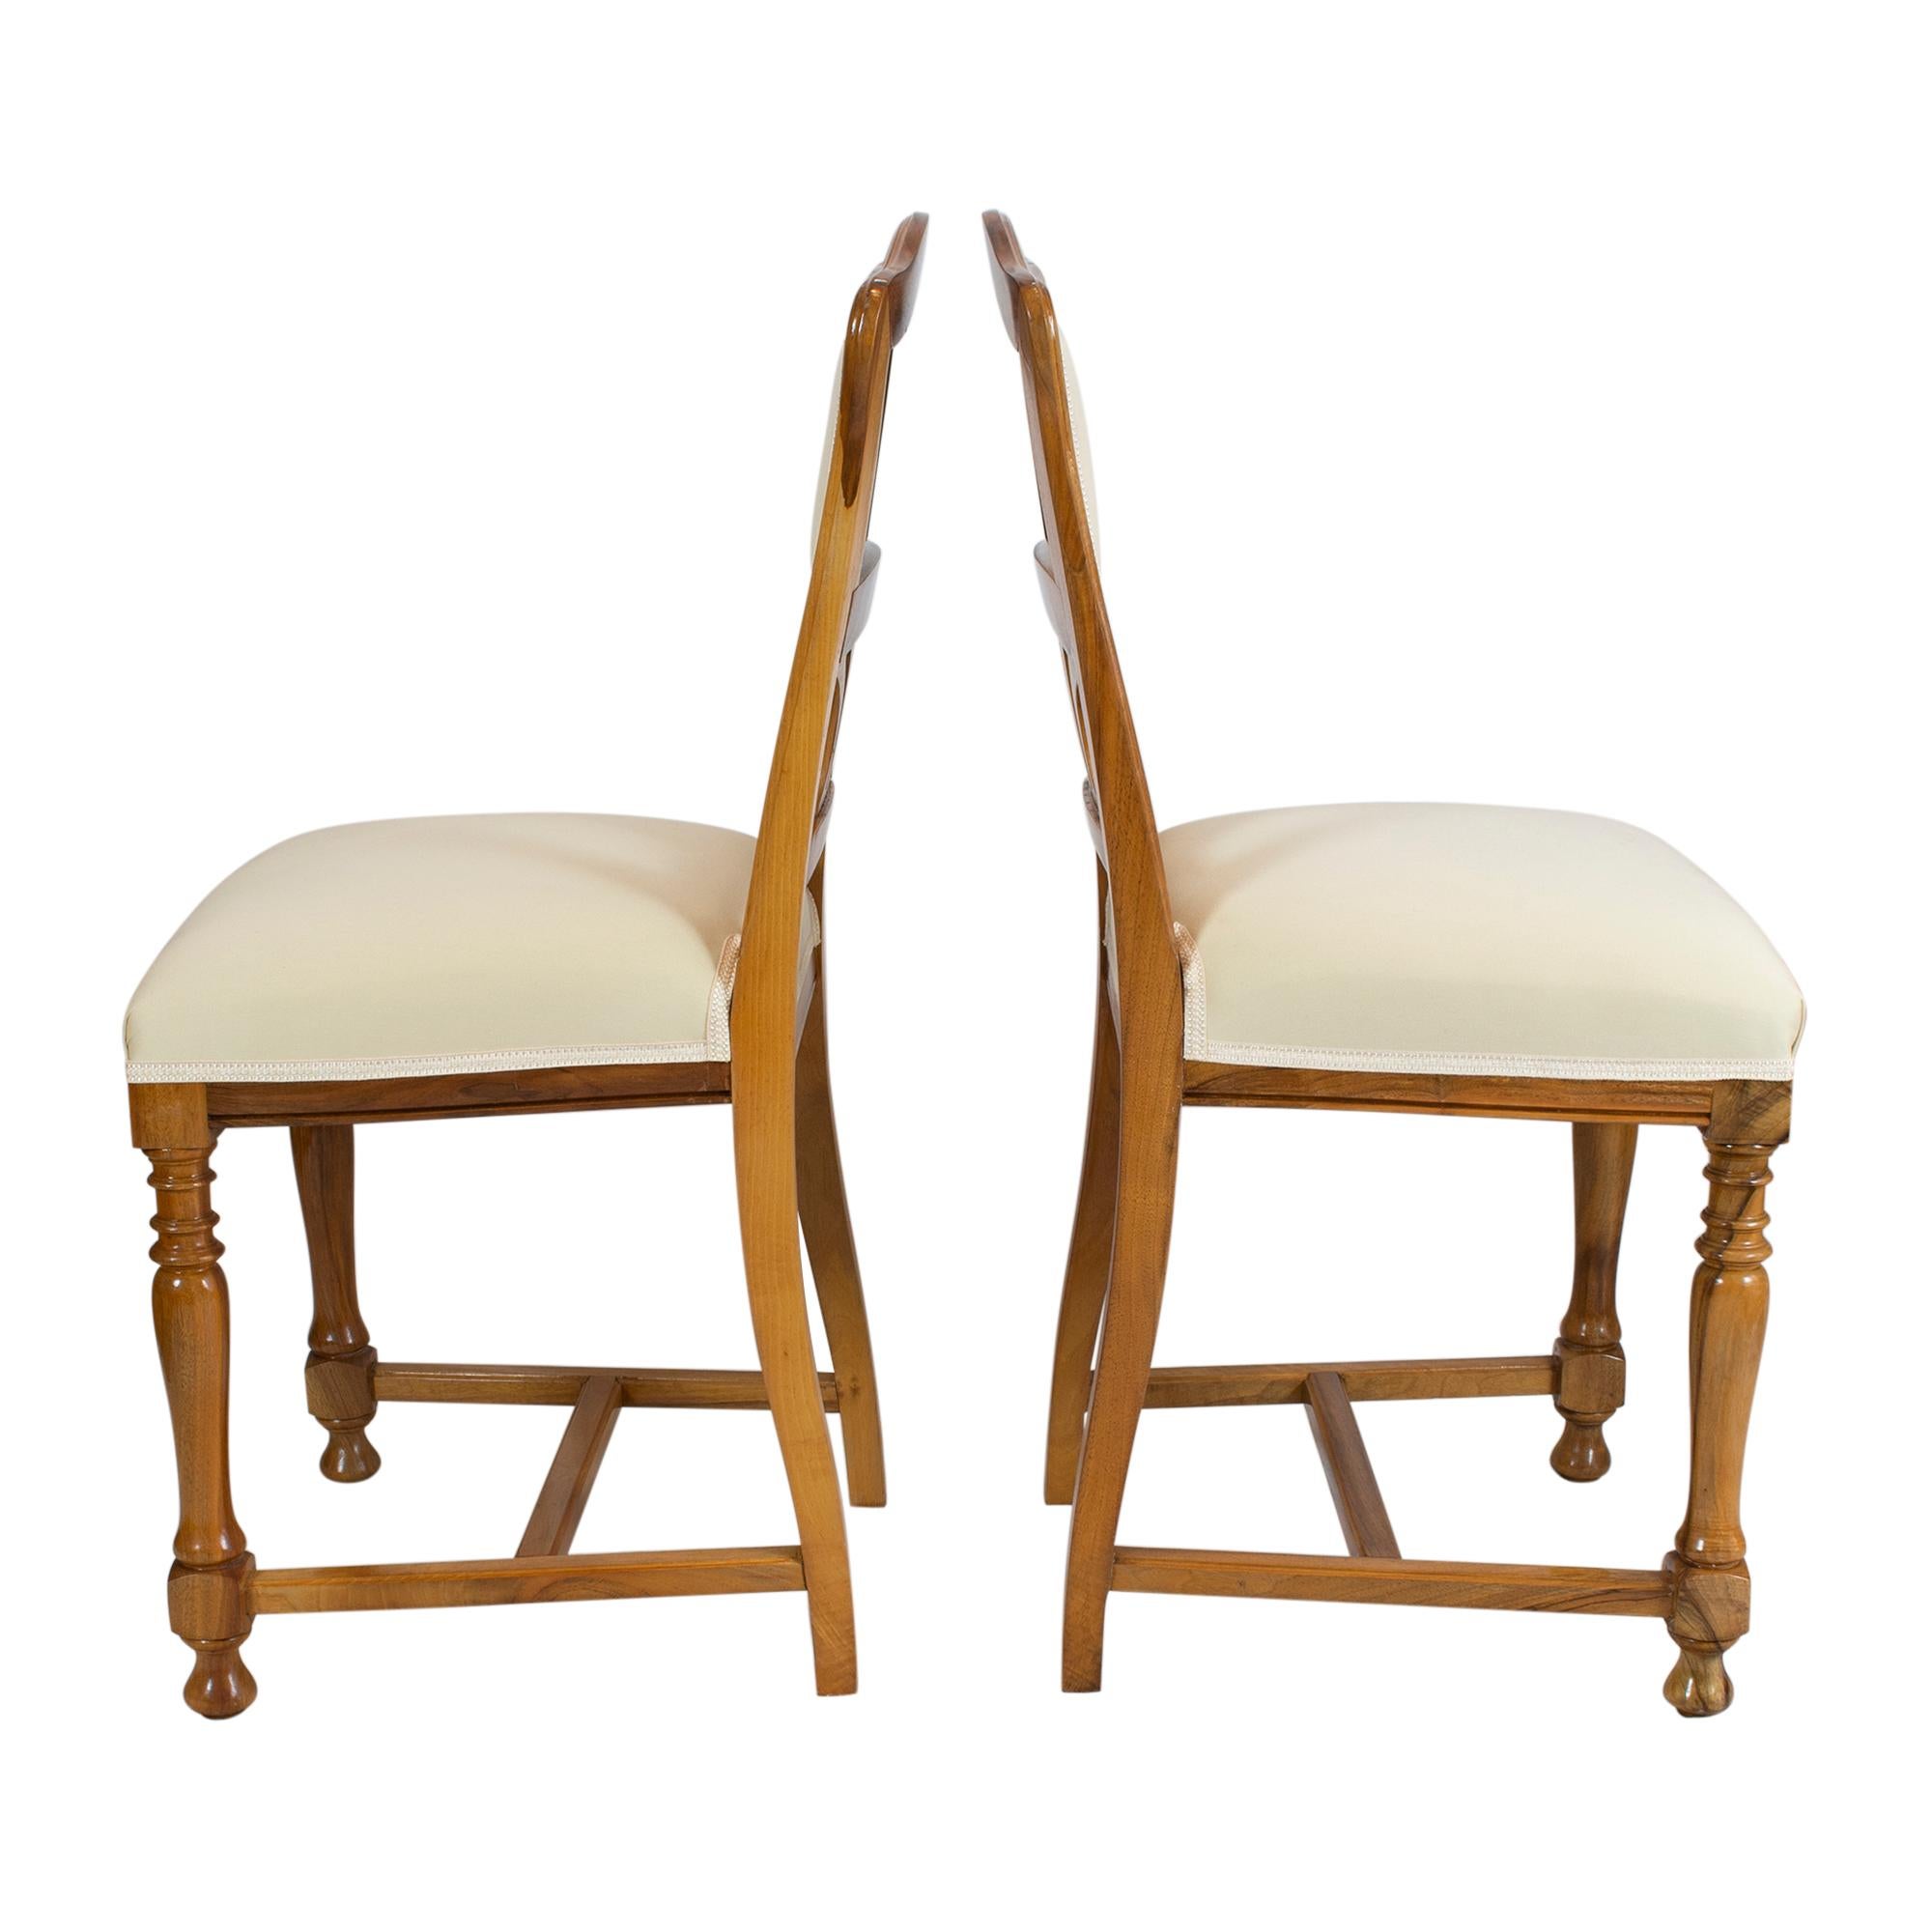 Beautiful pair of chairs from the Art Nouveau period in solid walnut wood. 
The chairs are reupholstered and covered with new fabric. In very good restored condition.